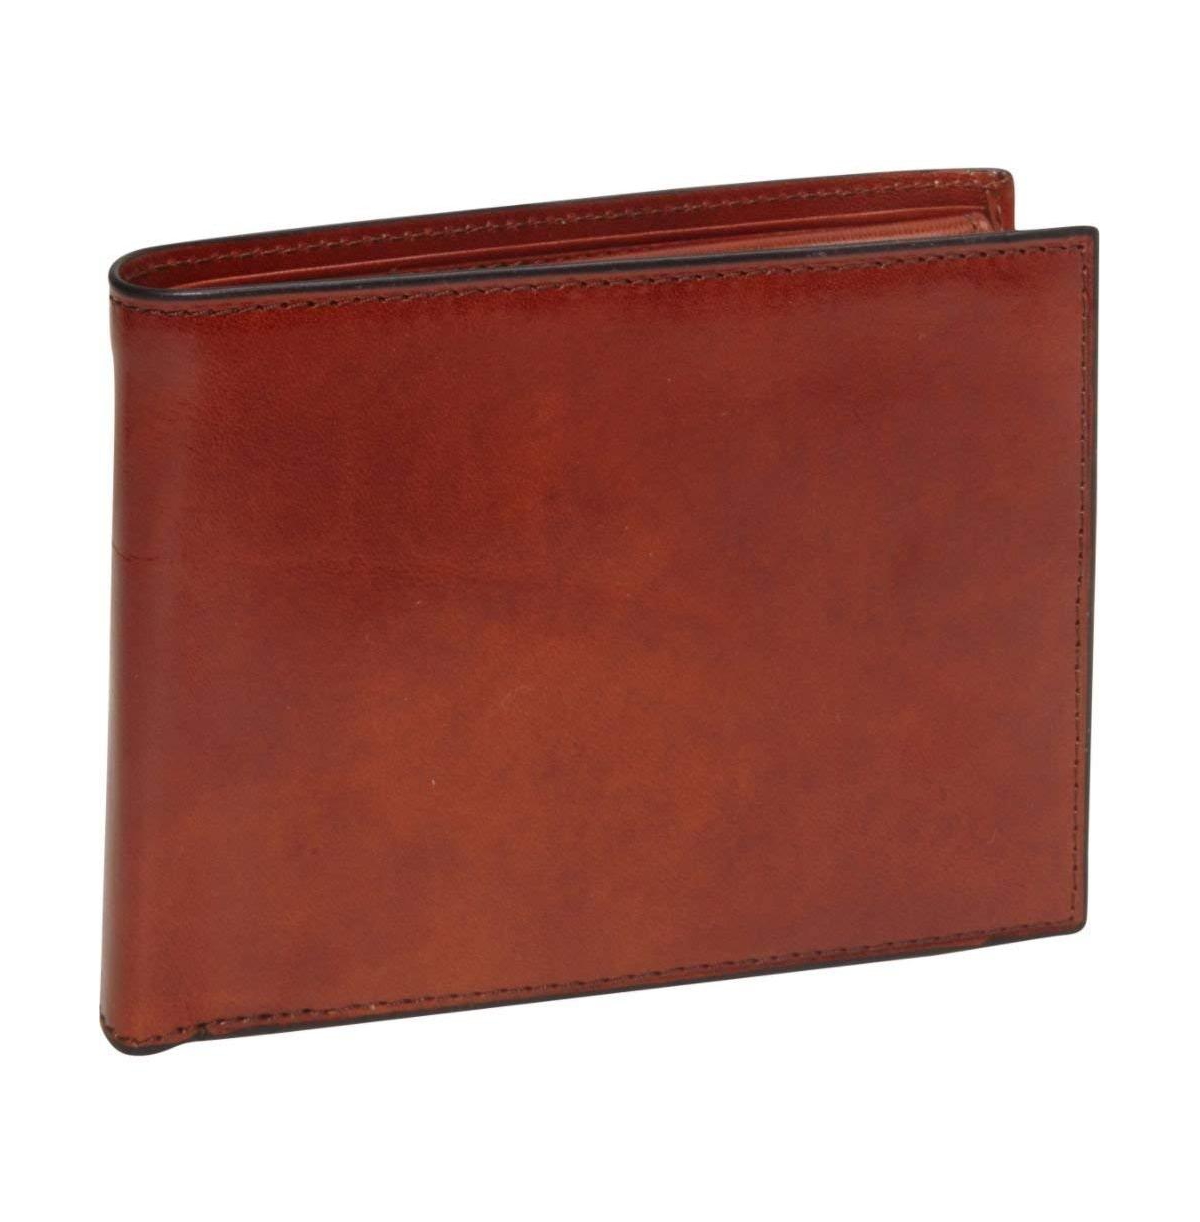 Mens Old Leather Credit Wallet w/Id Passcase - Amber